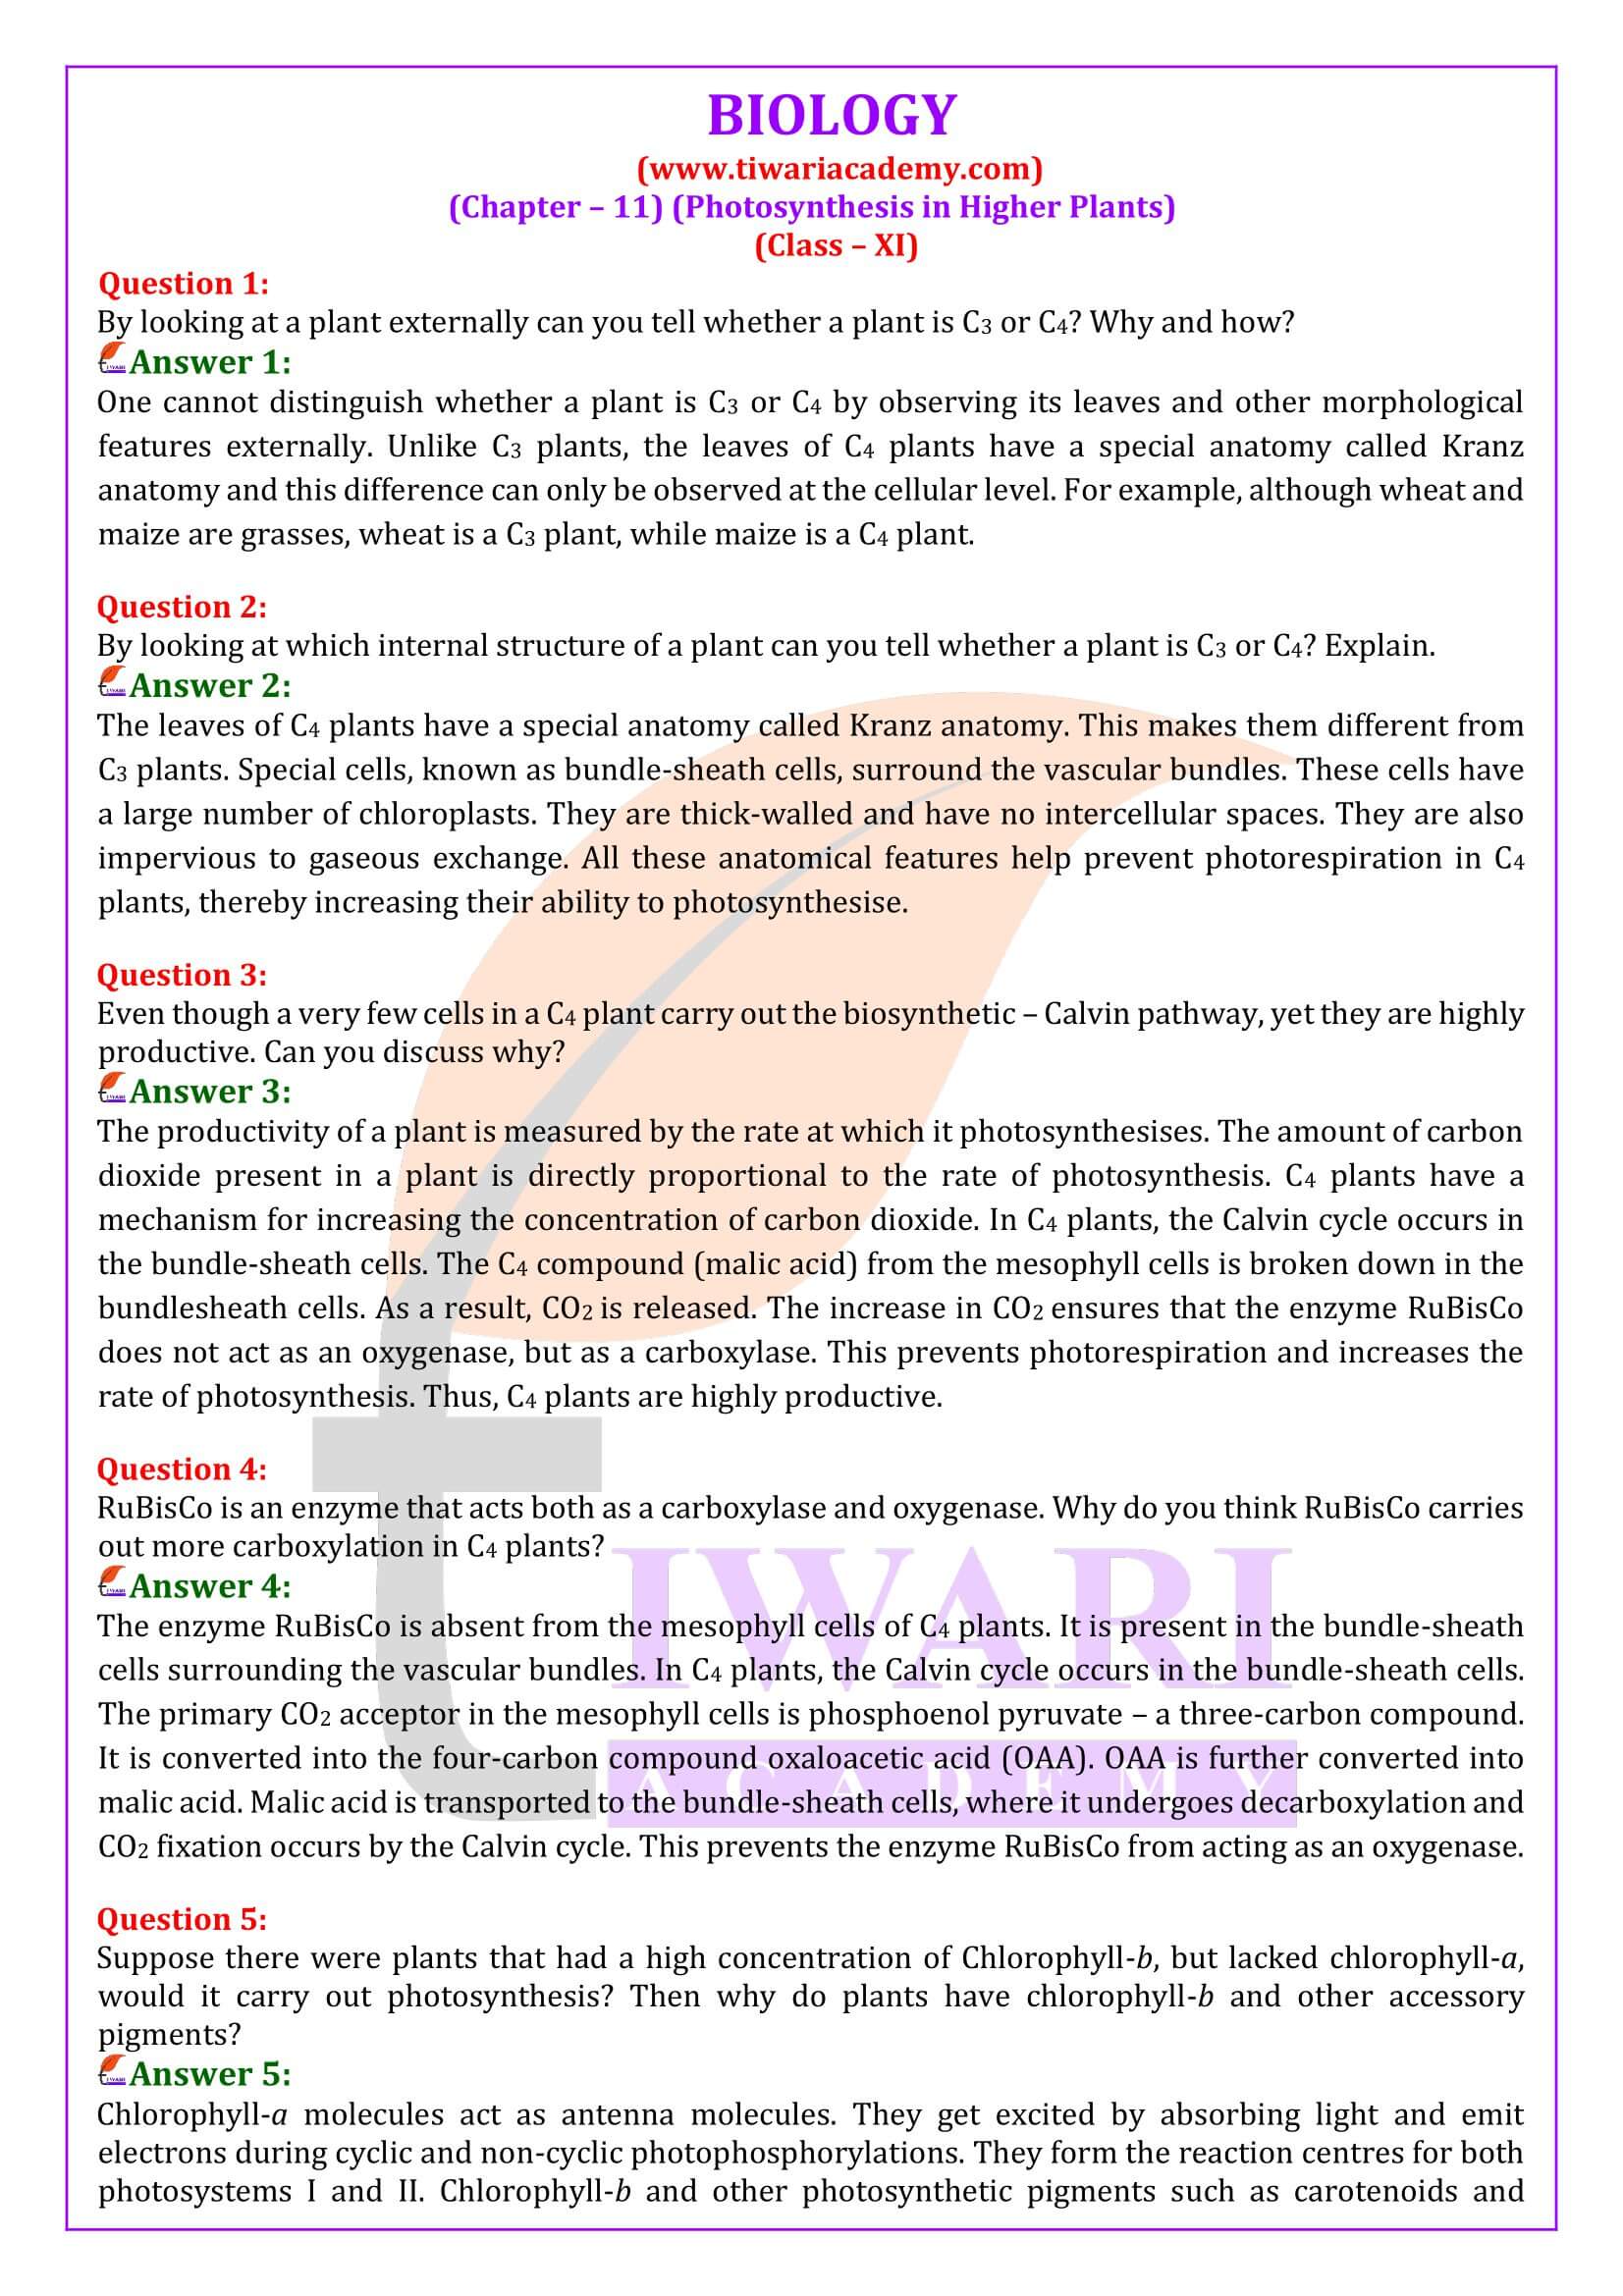 NCERT Solutions for Class 11 Biology Chapter 11